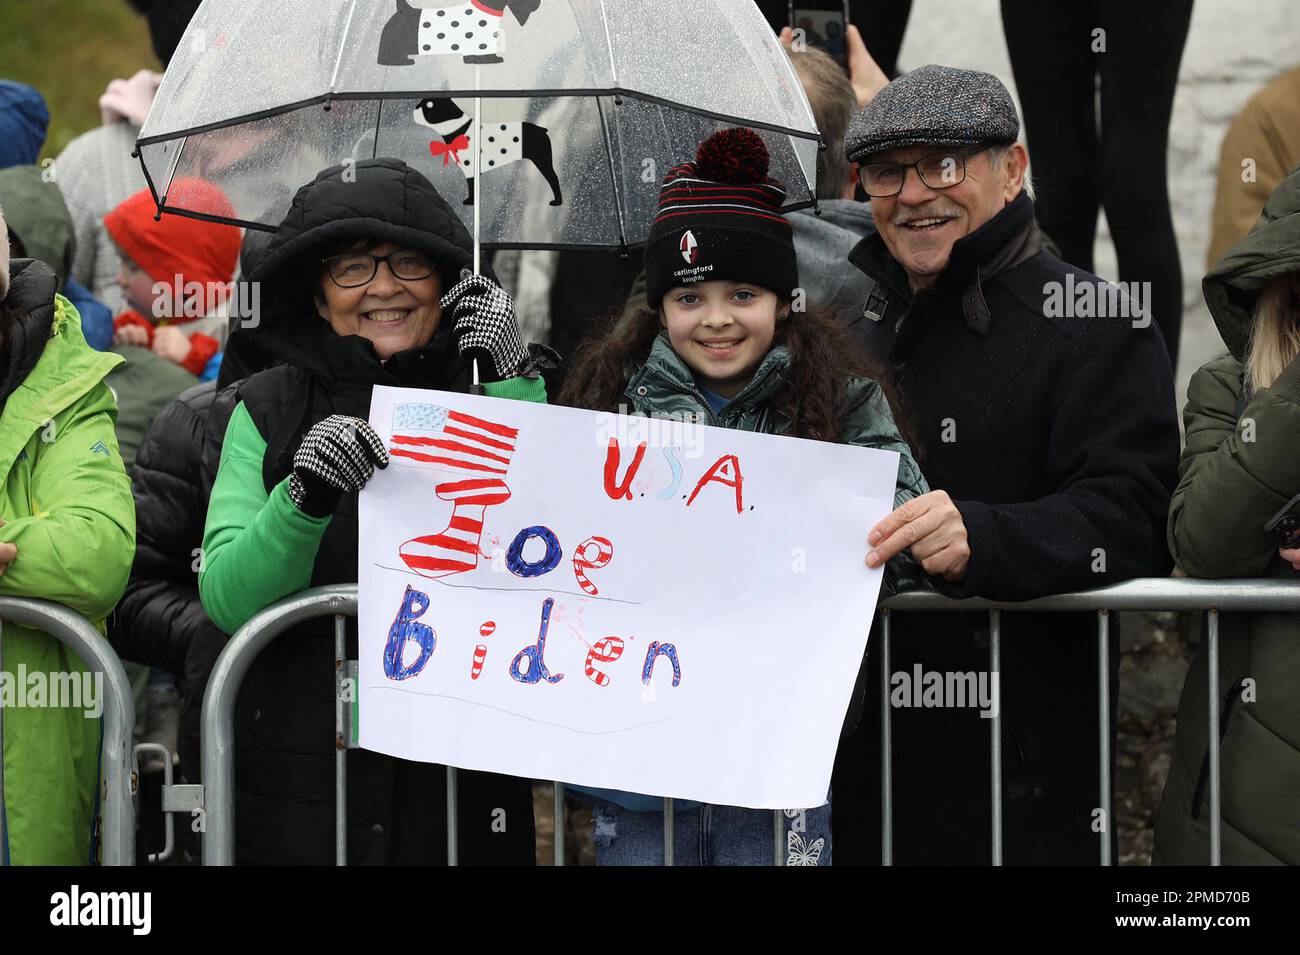 Members of the public gather as they wait for US President Joe Biden during his walking tour of Dowtown Dundalk, Ireland on April 12, 2023. President Biden's visit marks the 25th anniversary of the Good Friday Agreement, the peace deal which ended three decades of conflict in Northern Ireland. Photo by Irish Foreign Ministry / UPI Stock Photo